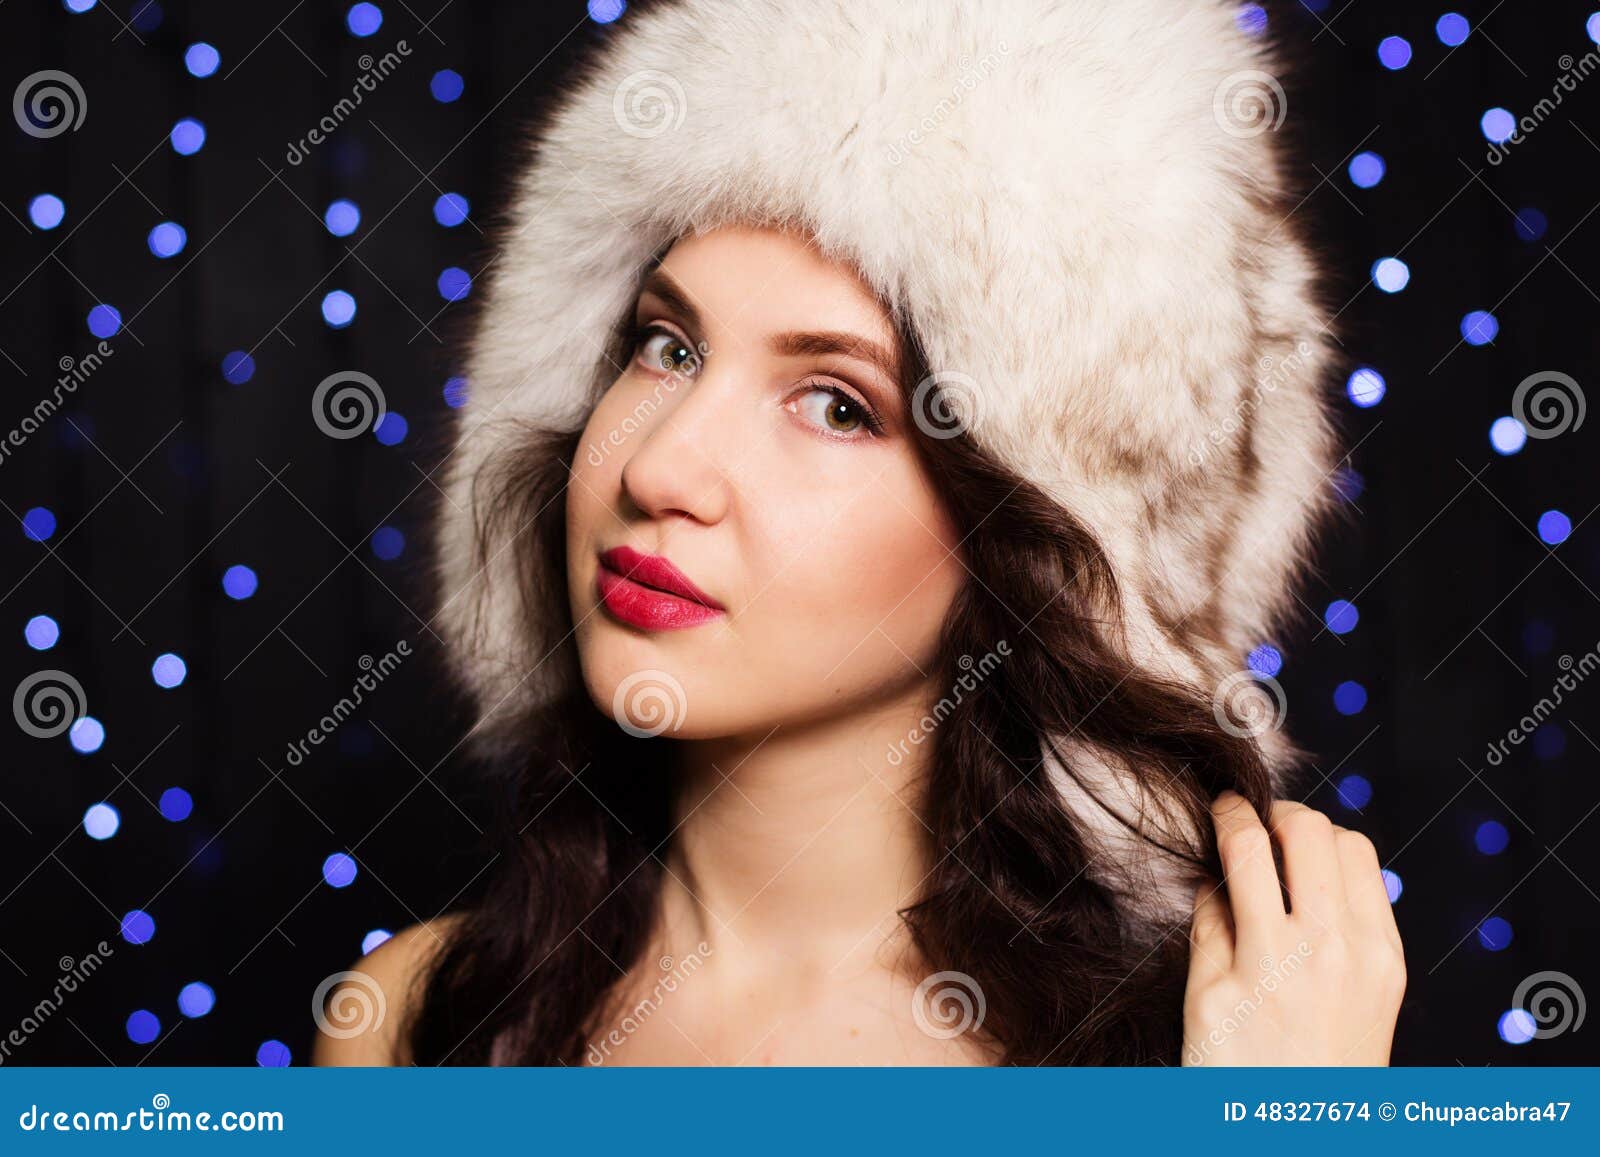 Pretty Smiling Girl in a Furry Winter Hat Stock Photo - Image of ...